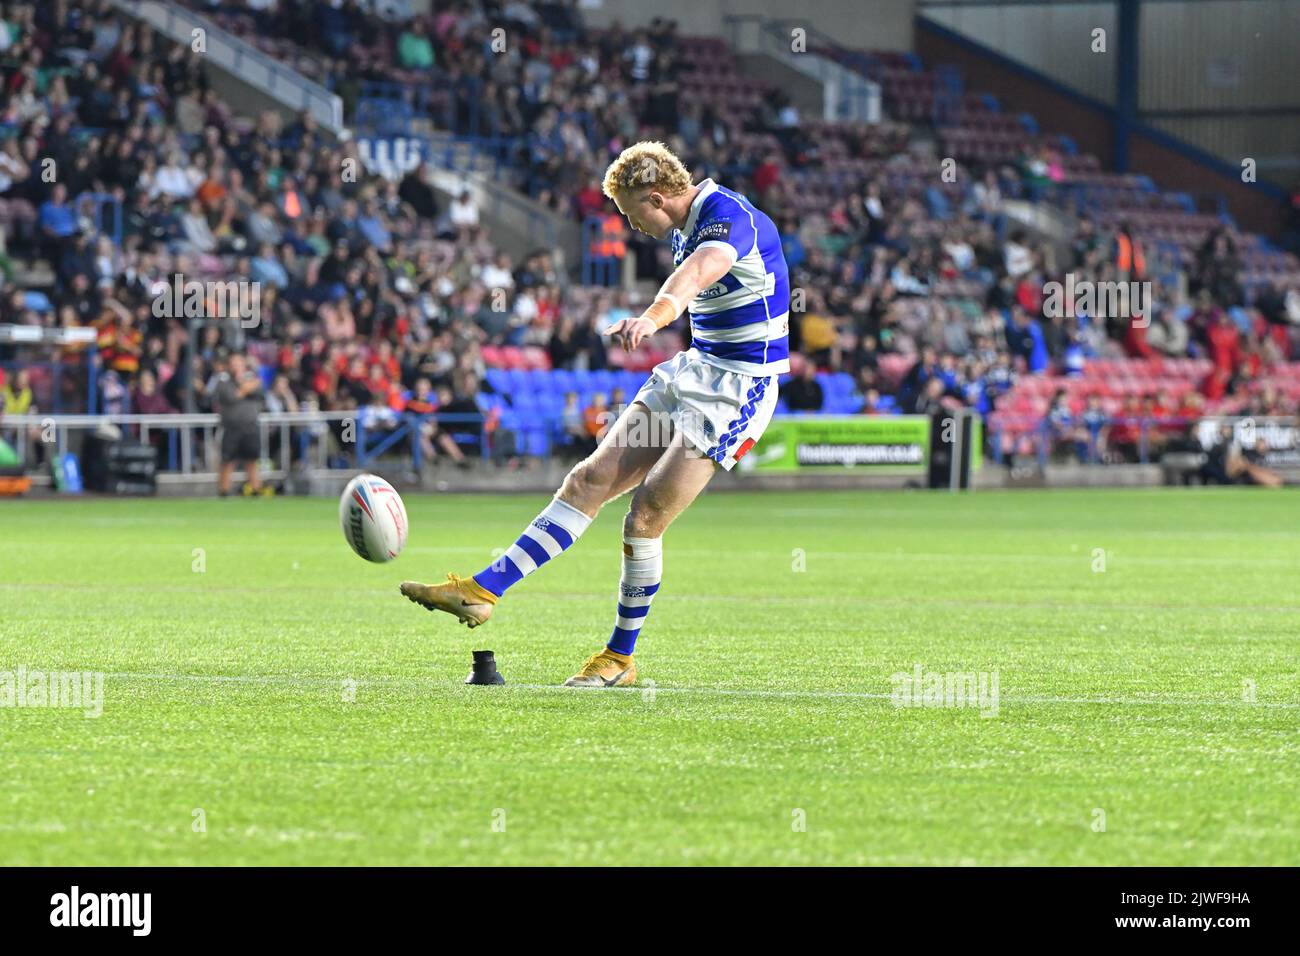 DCBL Stadium, Widnes, England. 5th September 2022. Betfred Championship, Widnes Vikings versus Halifax Panthers; Walmsley converts a try for Halifax, Betfred Championship match between Widnes Vikings and Halifax Panthers Credit: Mark Percy/Alamy Live News Credit: MARK PERCY/Alamy Live News Stock Photo